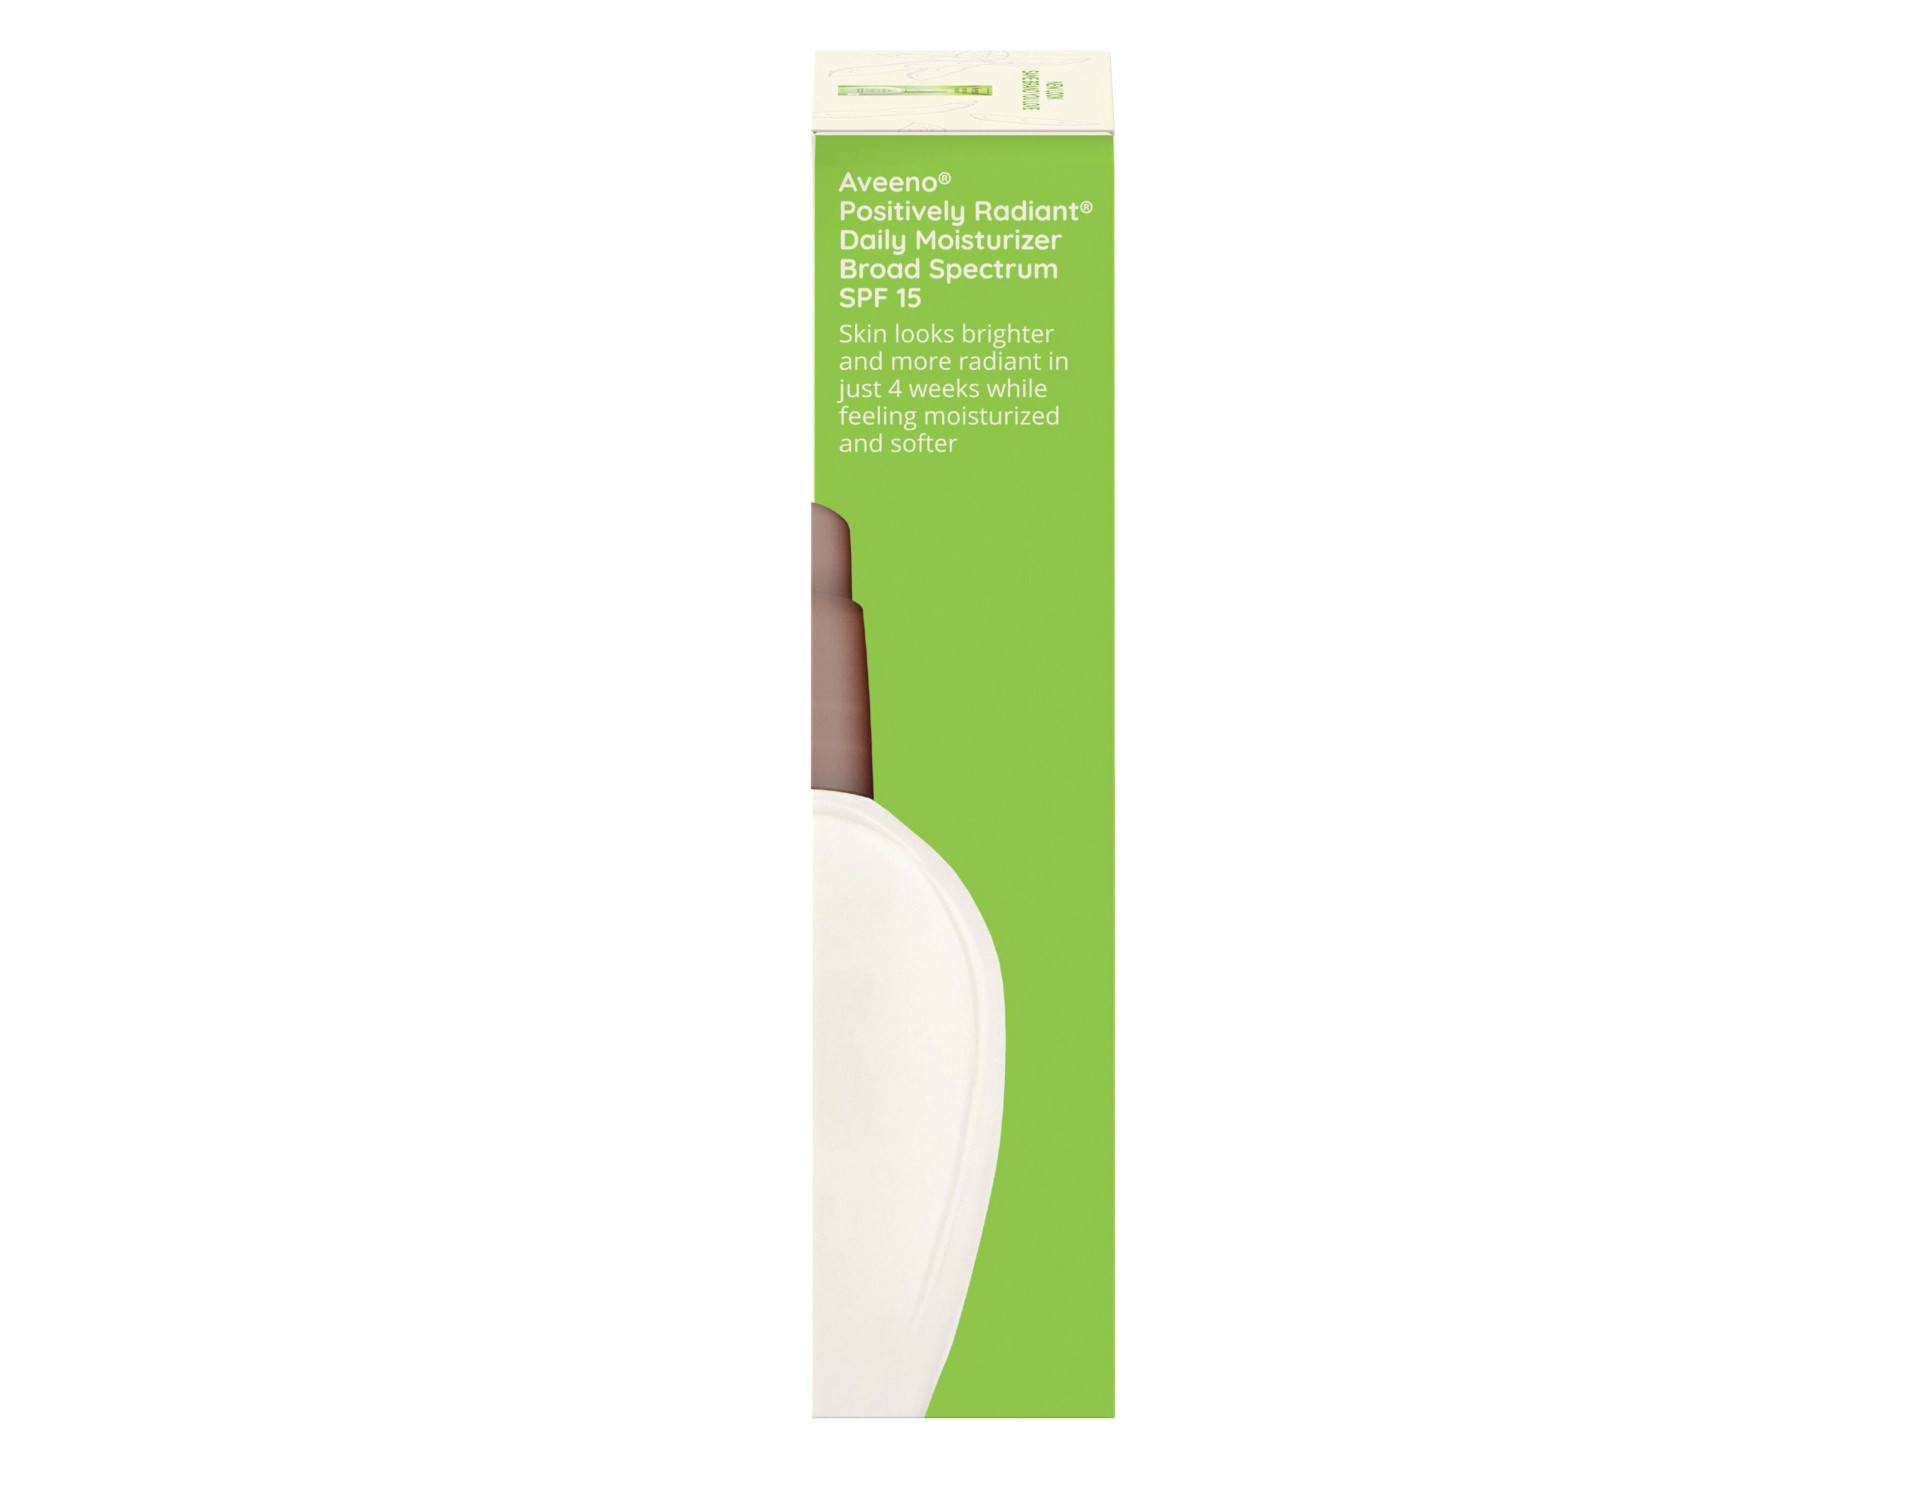 AVEENO Active Naturals Positively Radiant Daily Moisturizer SPF 15 4 oz - image 5 of 5